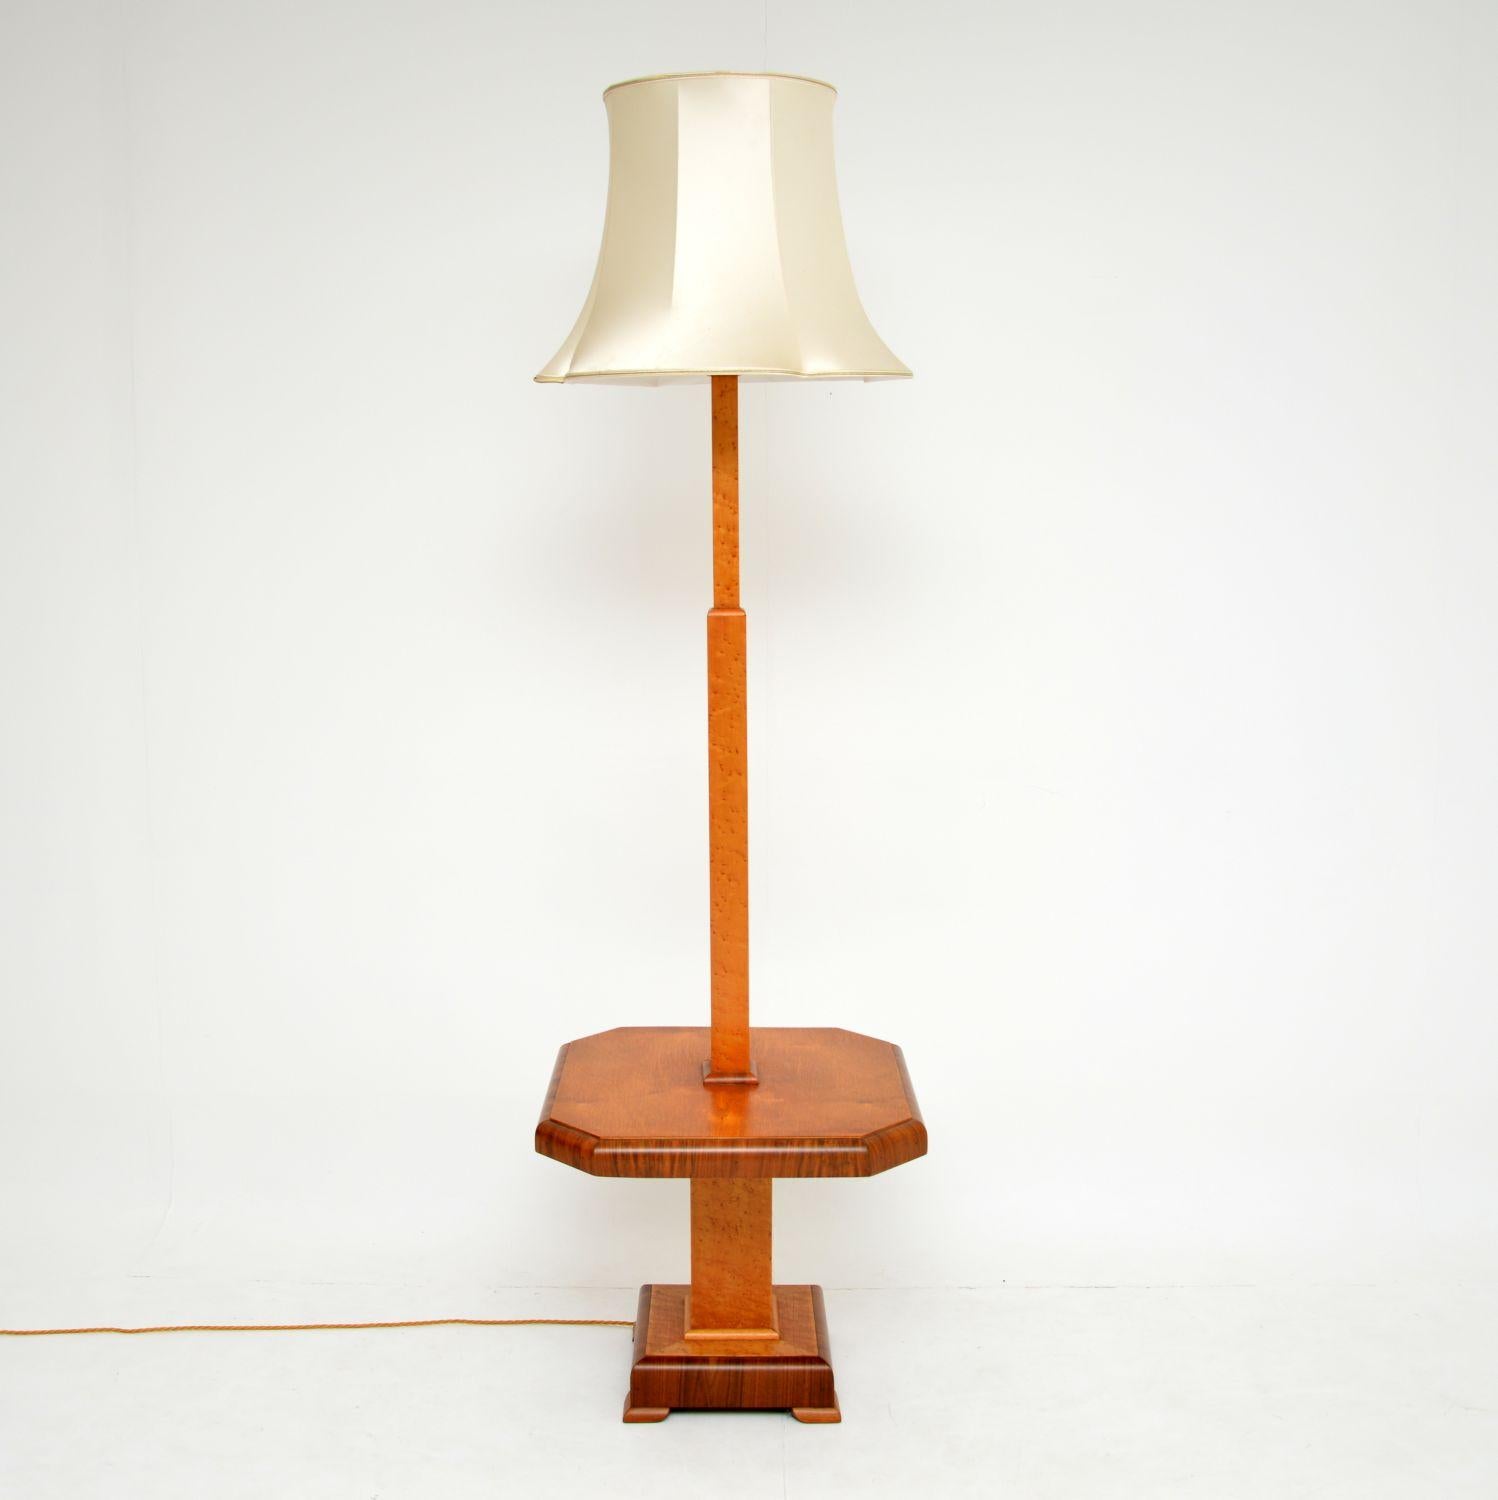 A stunning original vintage Art Deco period lamp stand with a built in table. This useful item was beautifully made from walnut and burr elm, it dates from the 1920-30’s. It is in superb condition, we have had the frame stripped and re-polished to a